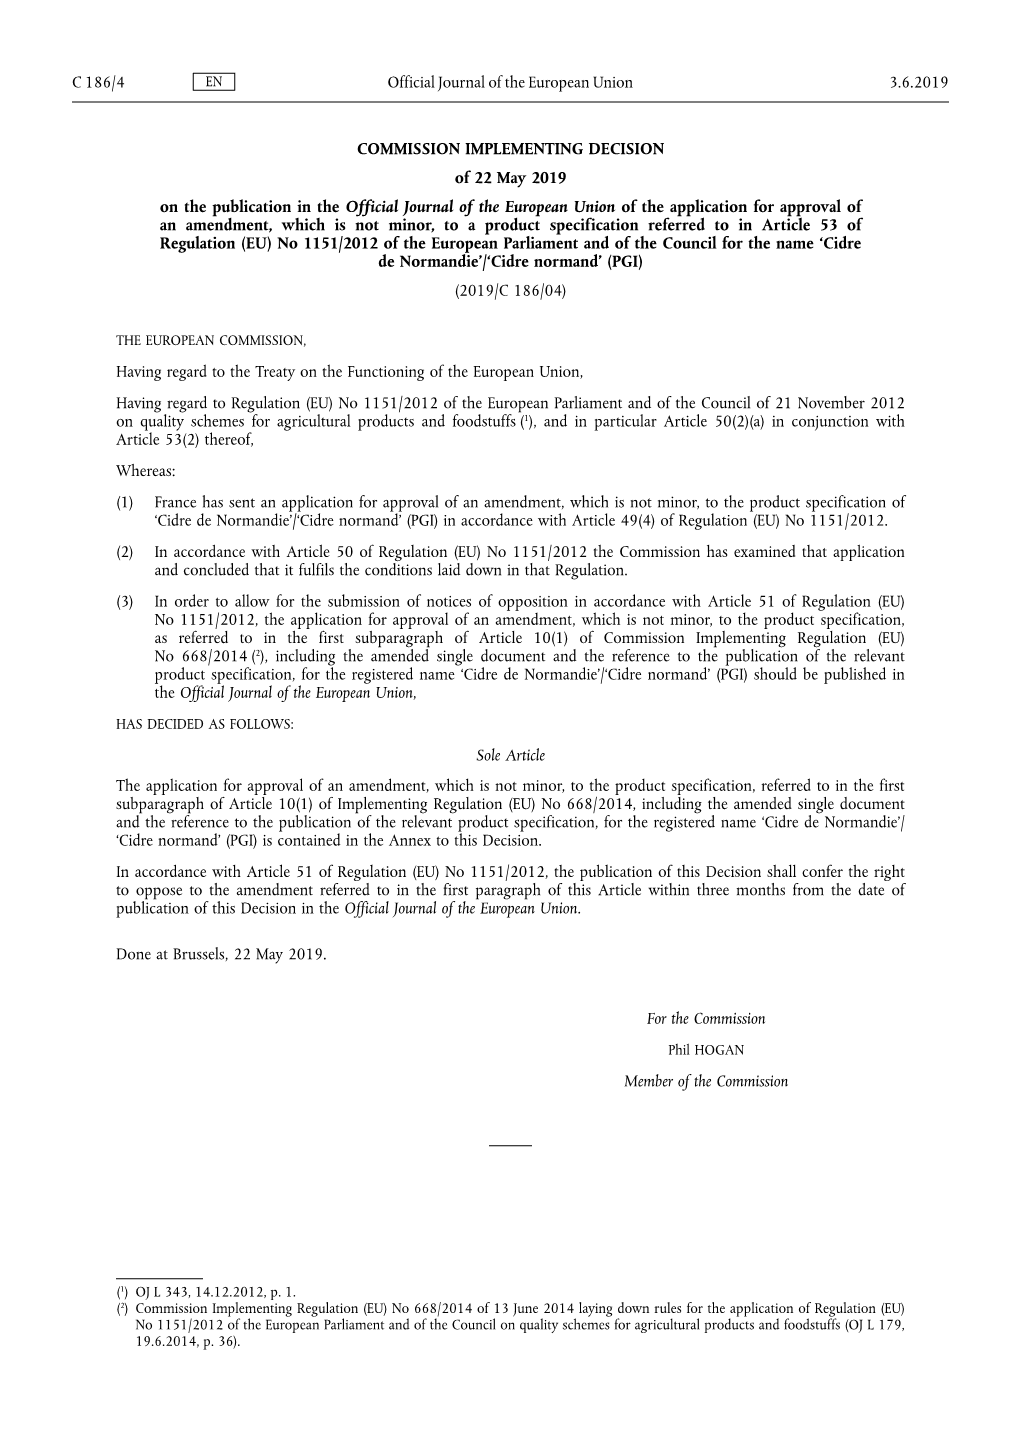 Commission Implementing Decision of 22 May 2019 on the Publication In